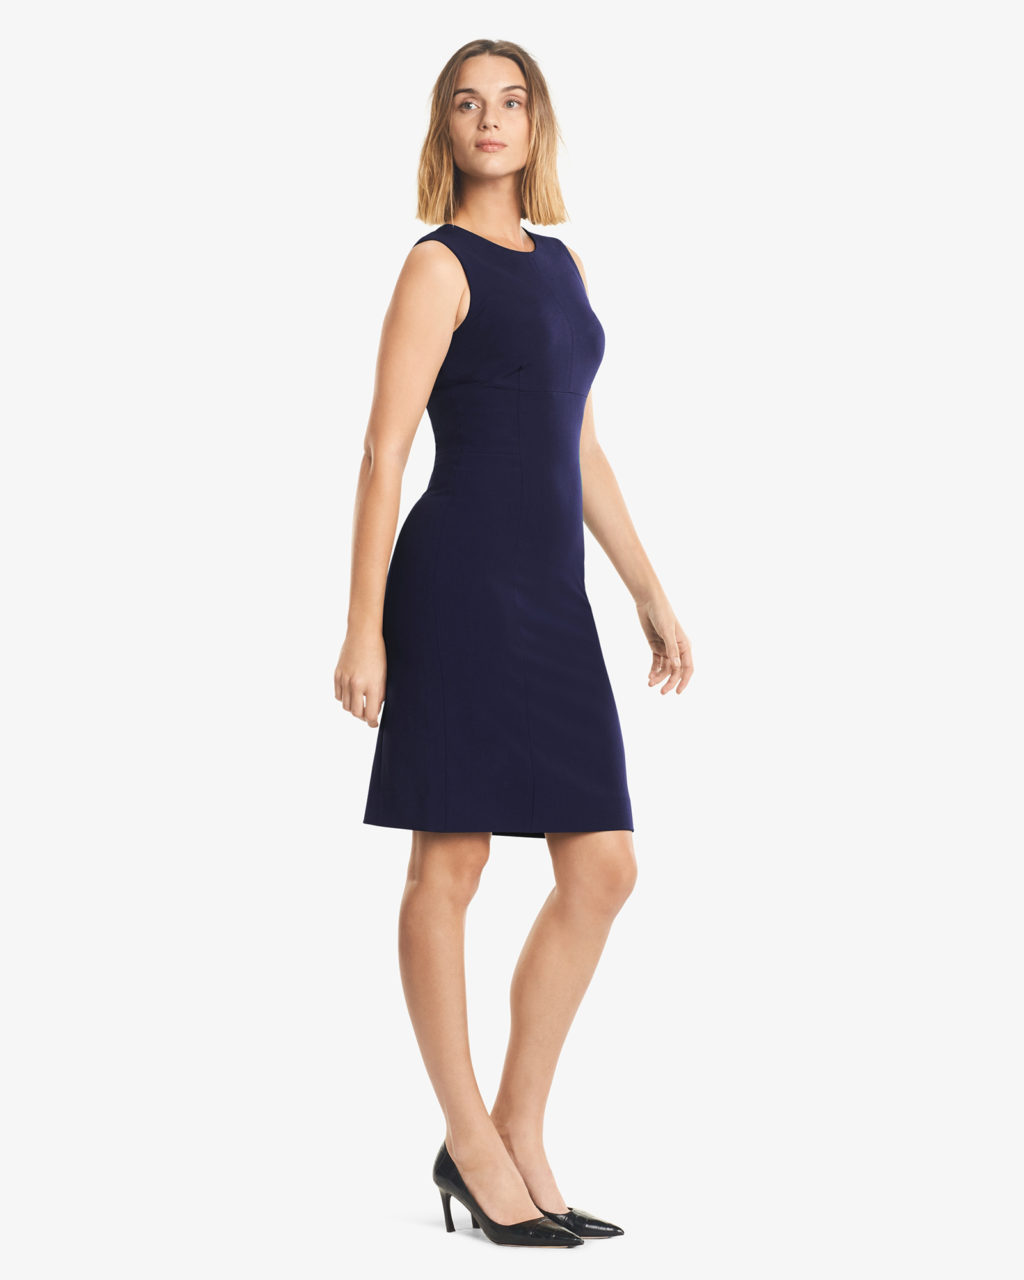 stylish comfortable travel clothes for women - blue dress